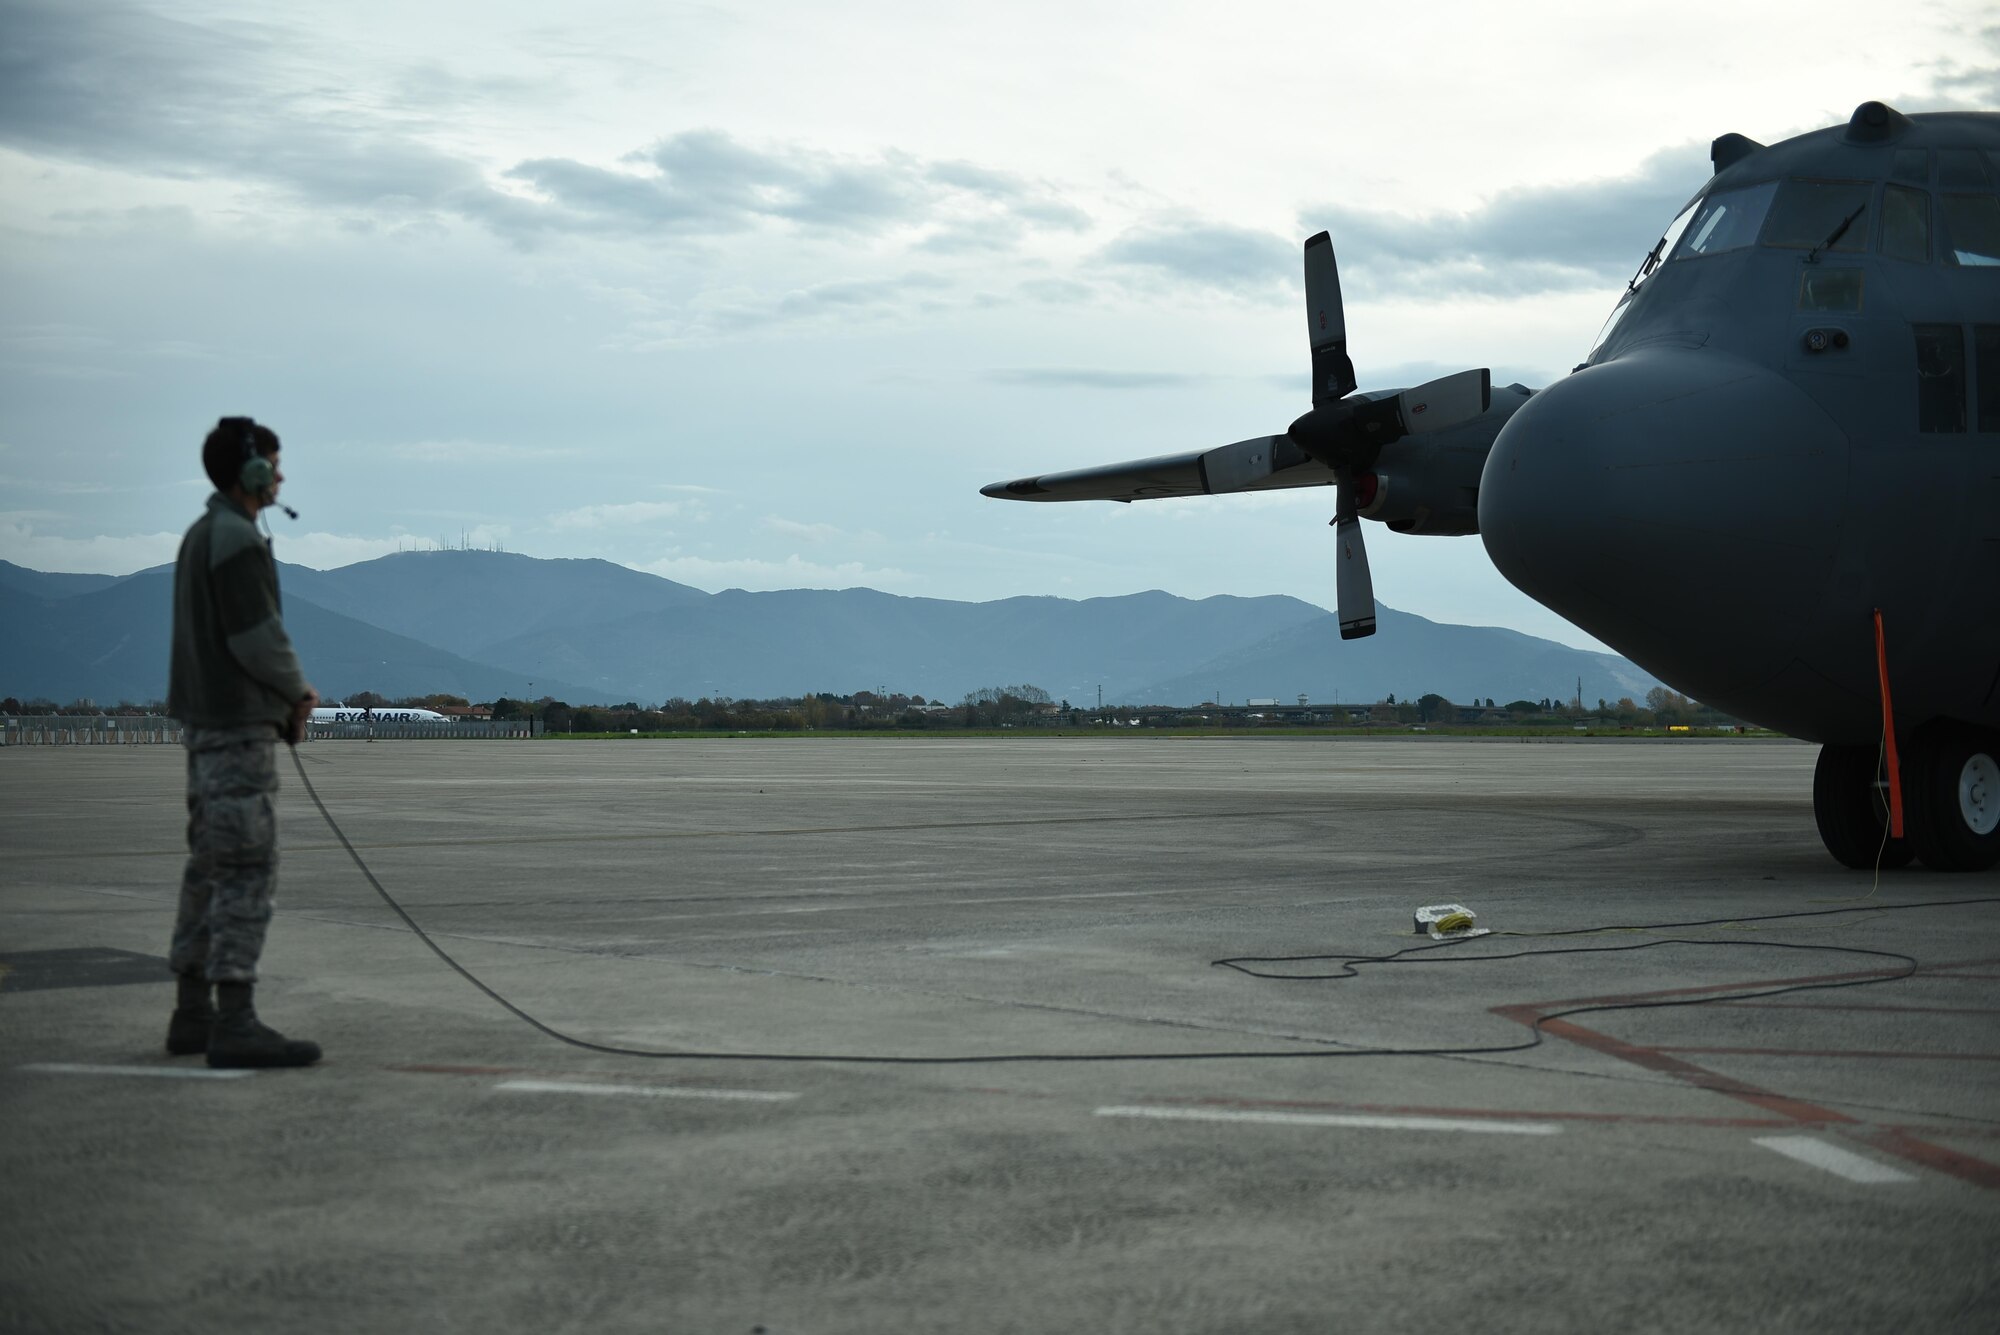 Senior Airman Drew Roberts prepares to marshall a 165th Airlift Wing C-130H3 Hercules during Operation Mangusta in Pisa, Italy. (U.S. Air National Guard photo by Senior Airman Brandon Patterson)
